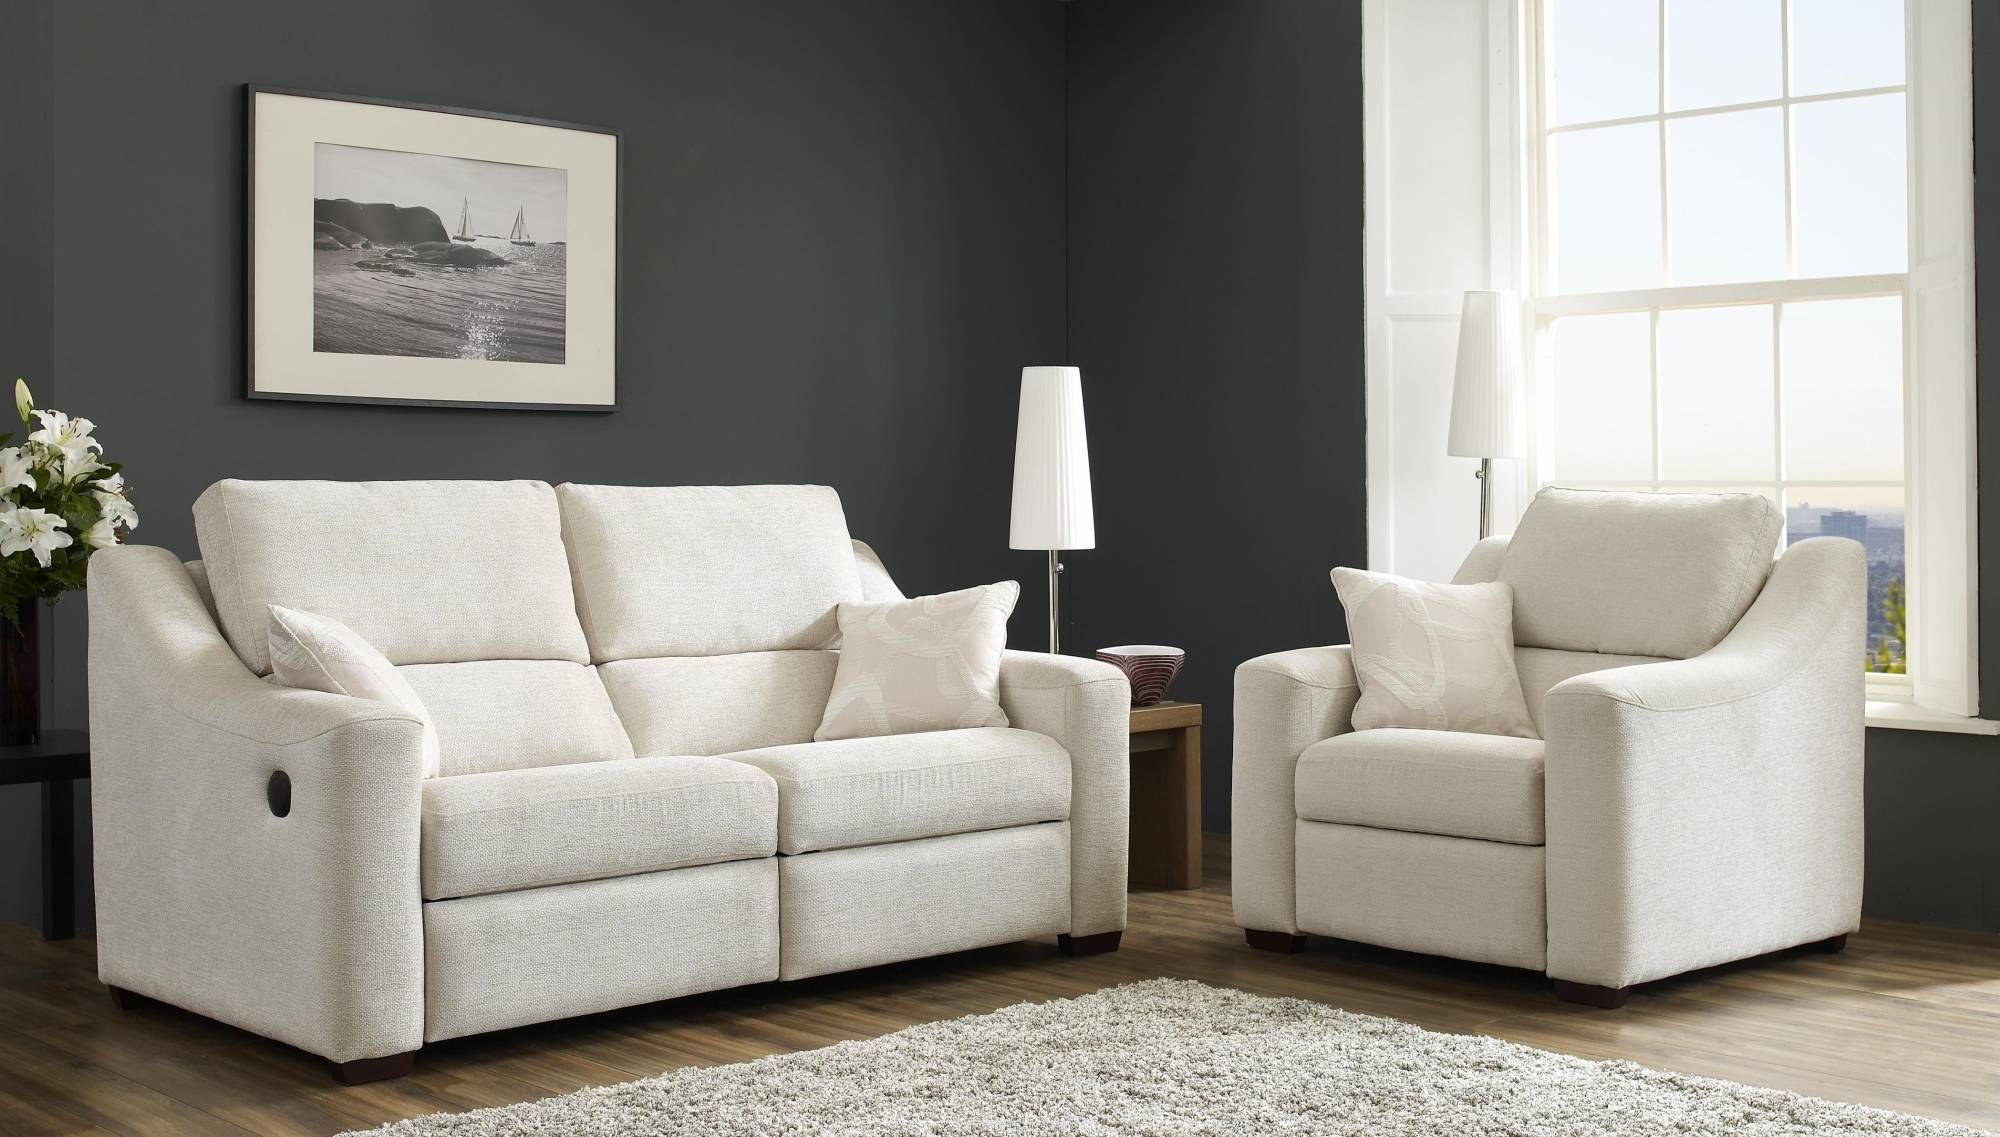 Sofas Center : Unusual Two Seater Recliner Sofa Picture Concept With 2 Seat Recliner Sofas (View 17 of 30)